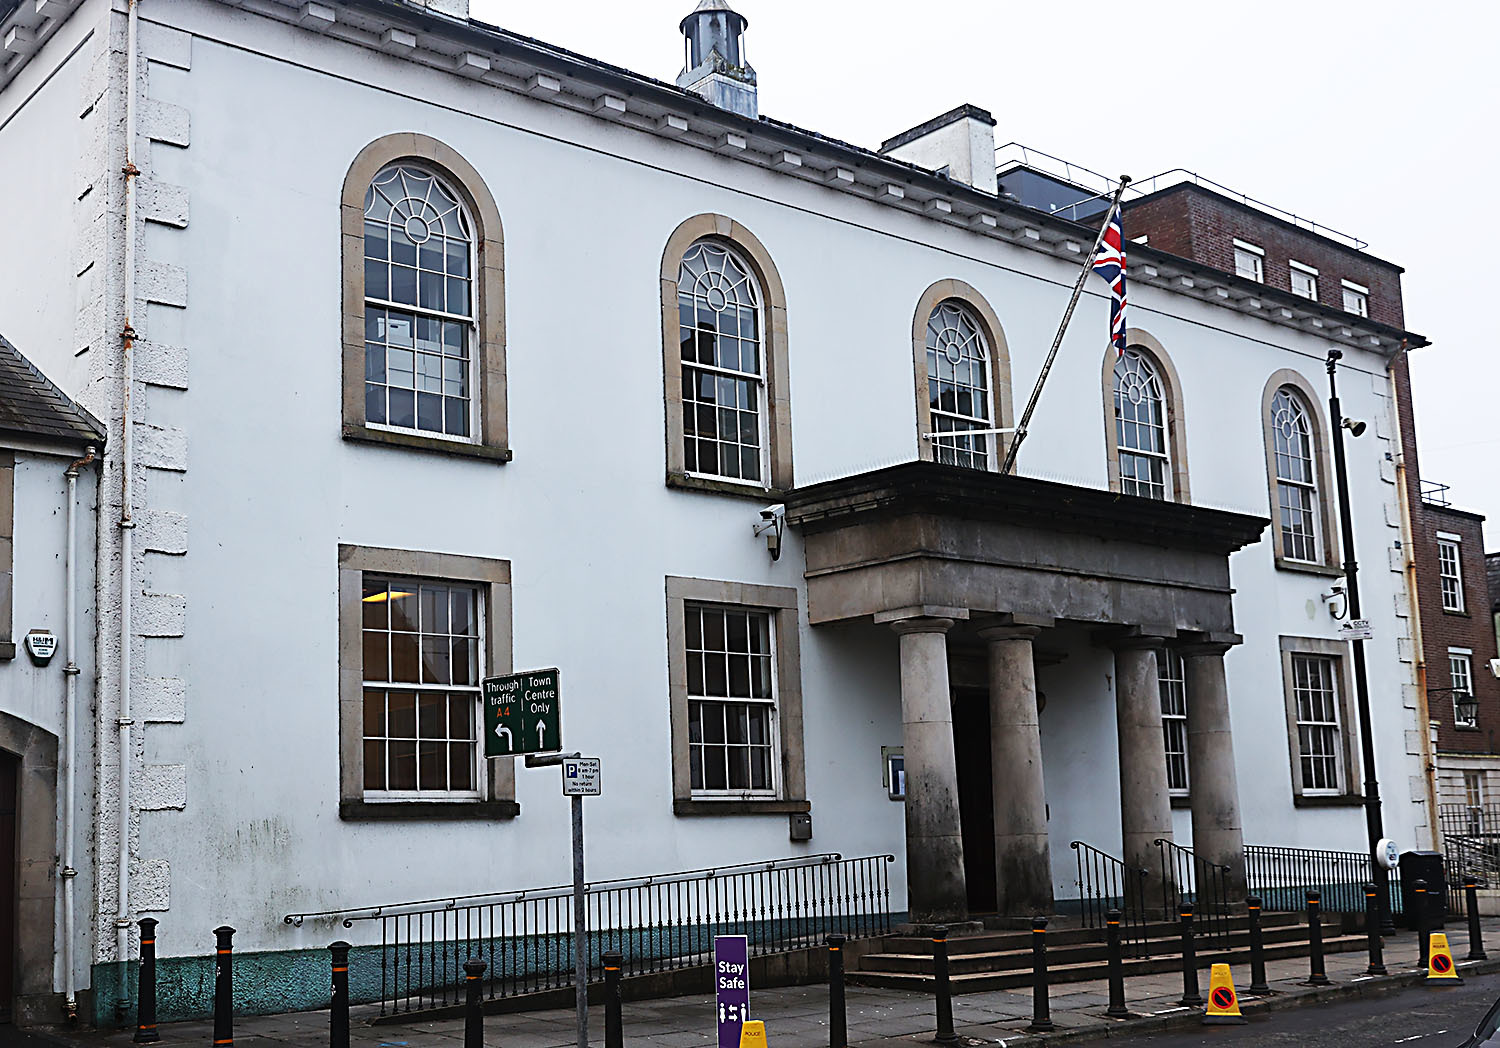 Fermanagh man brought back to court to face careless driving charge following police review